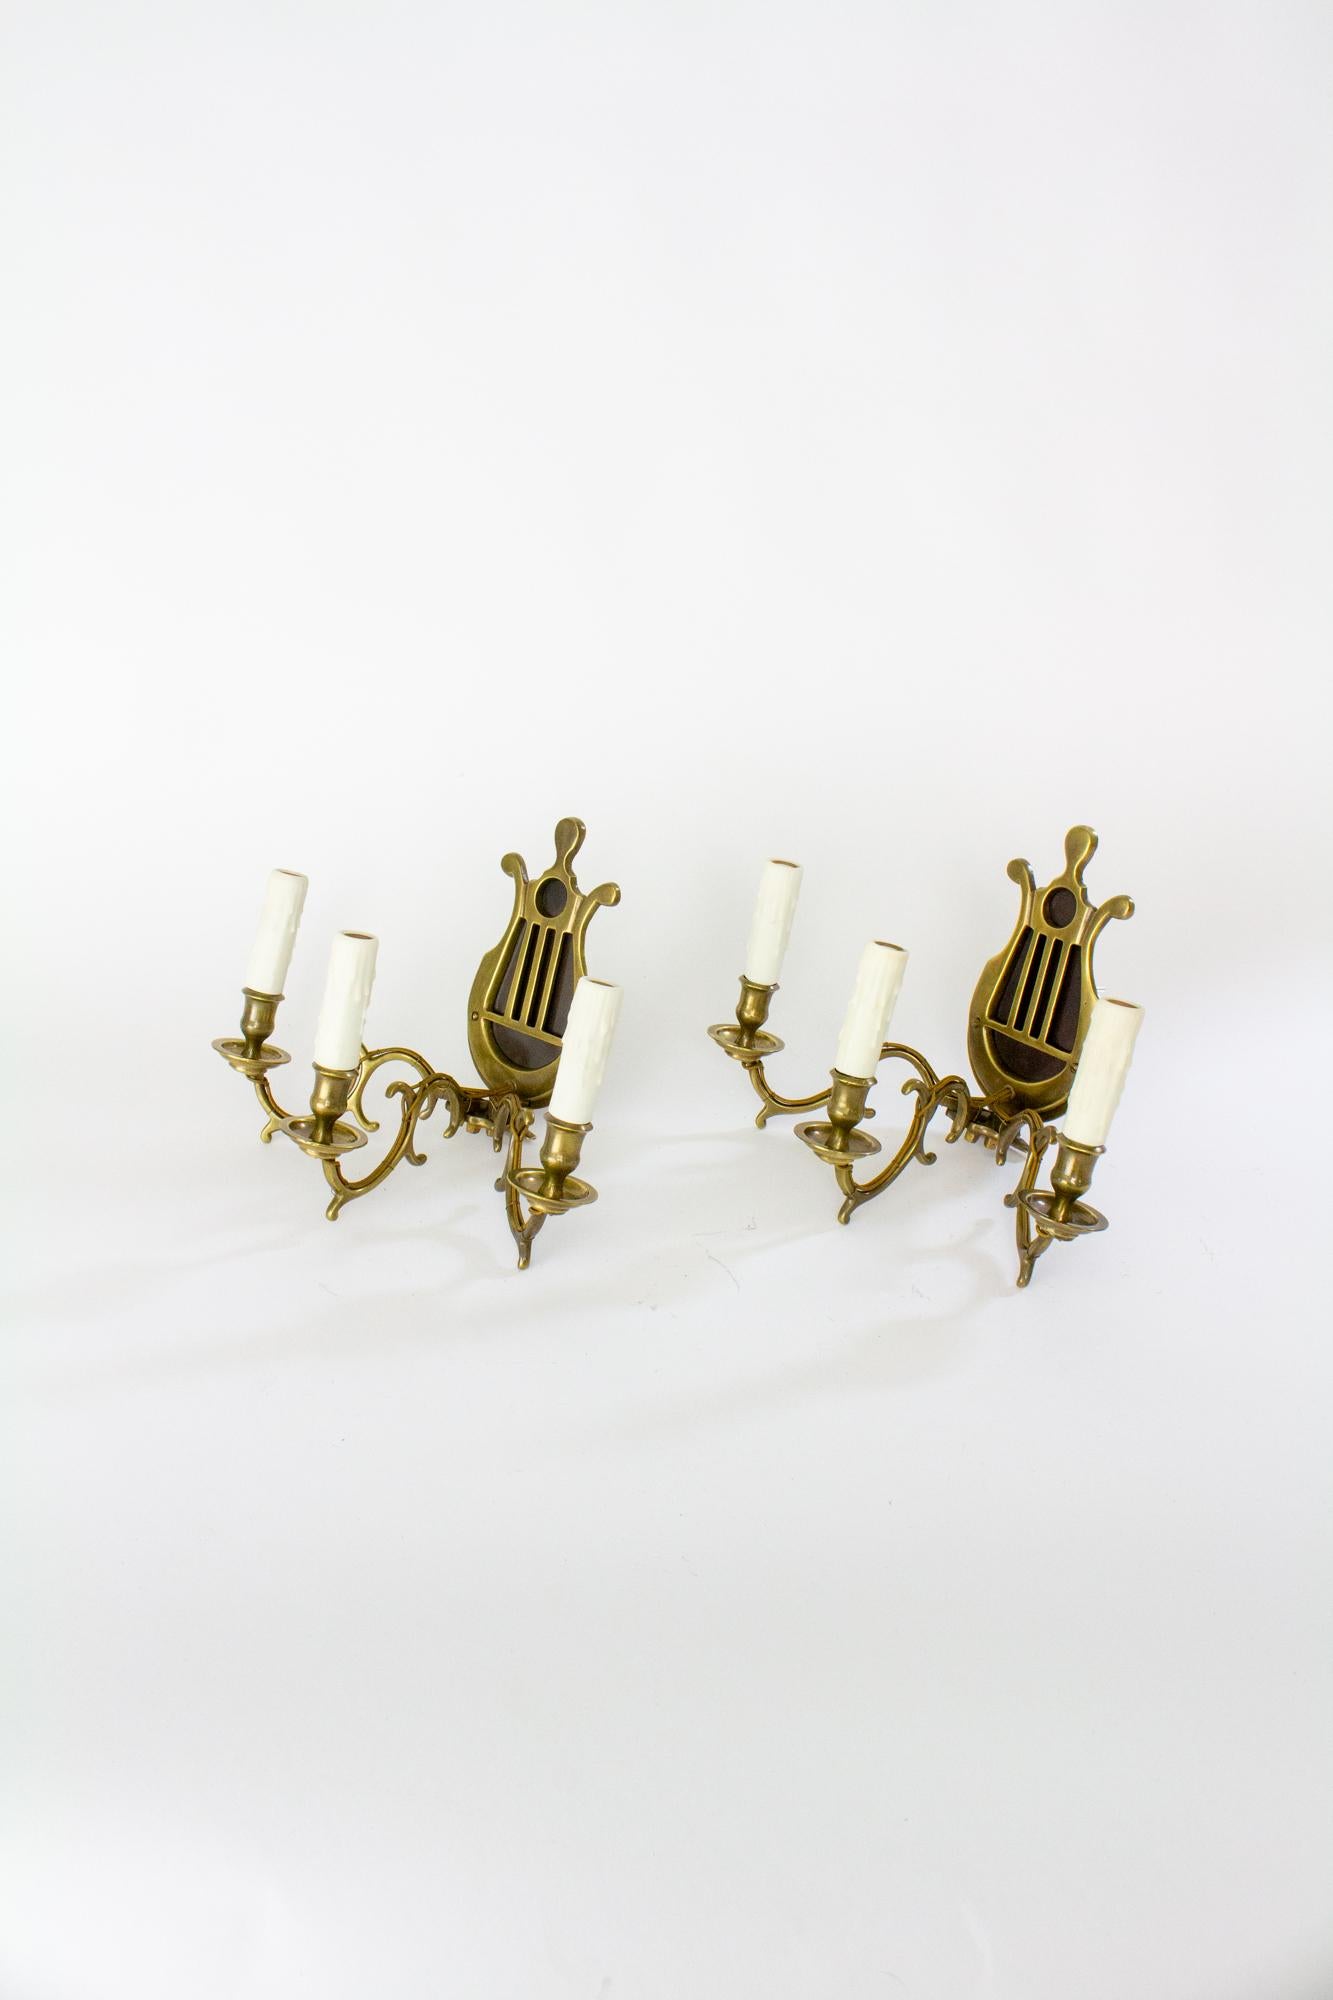 A pair of antique three arm lyre back sconces. Originally made for use with candles, these sconces have been carefully electrified. The arms have exterior wiring, with a very low profile. New polybeeswax candle covers with realistic drips. The